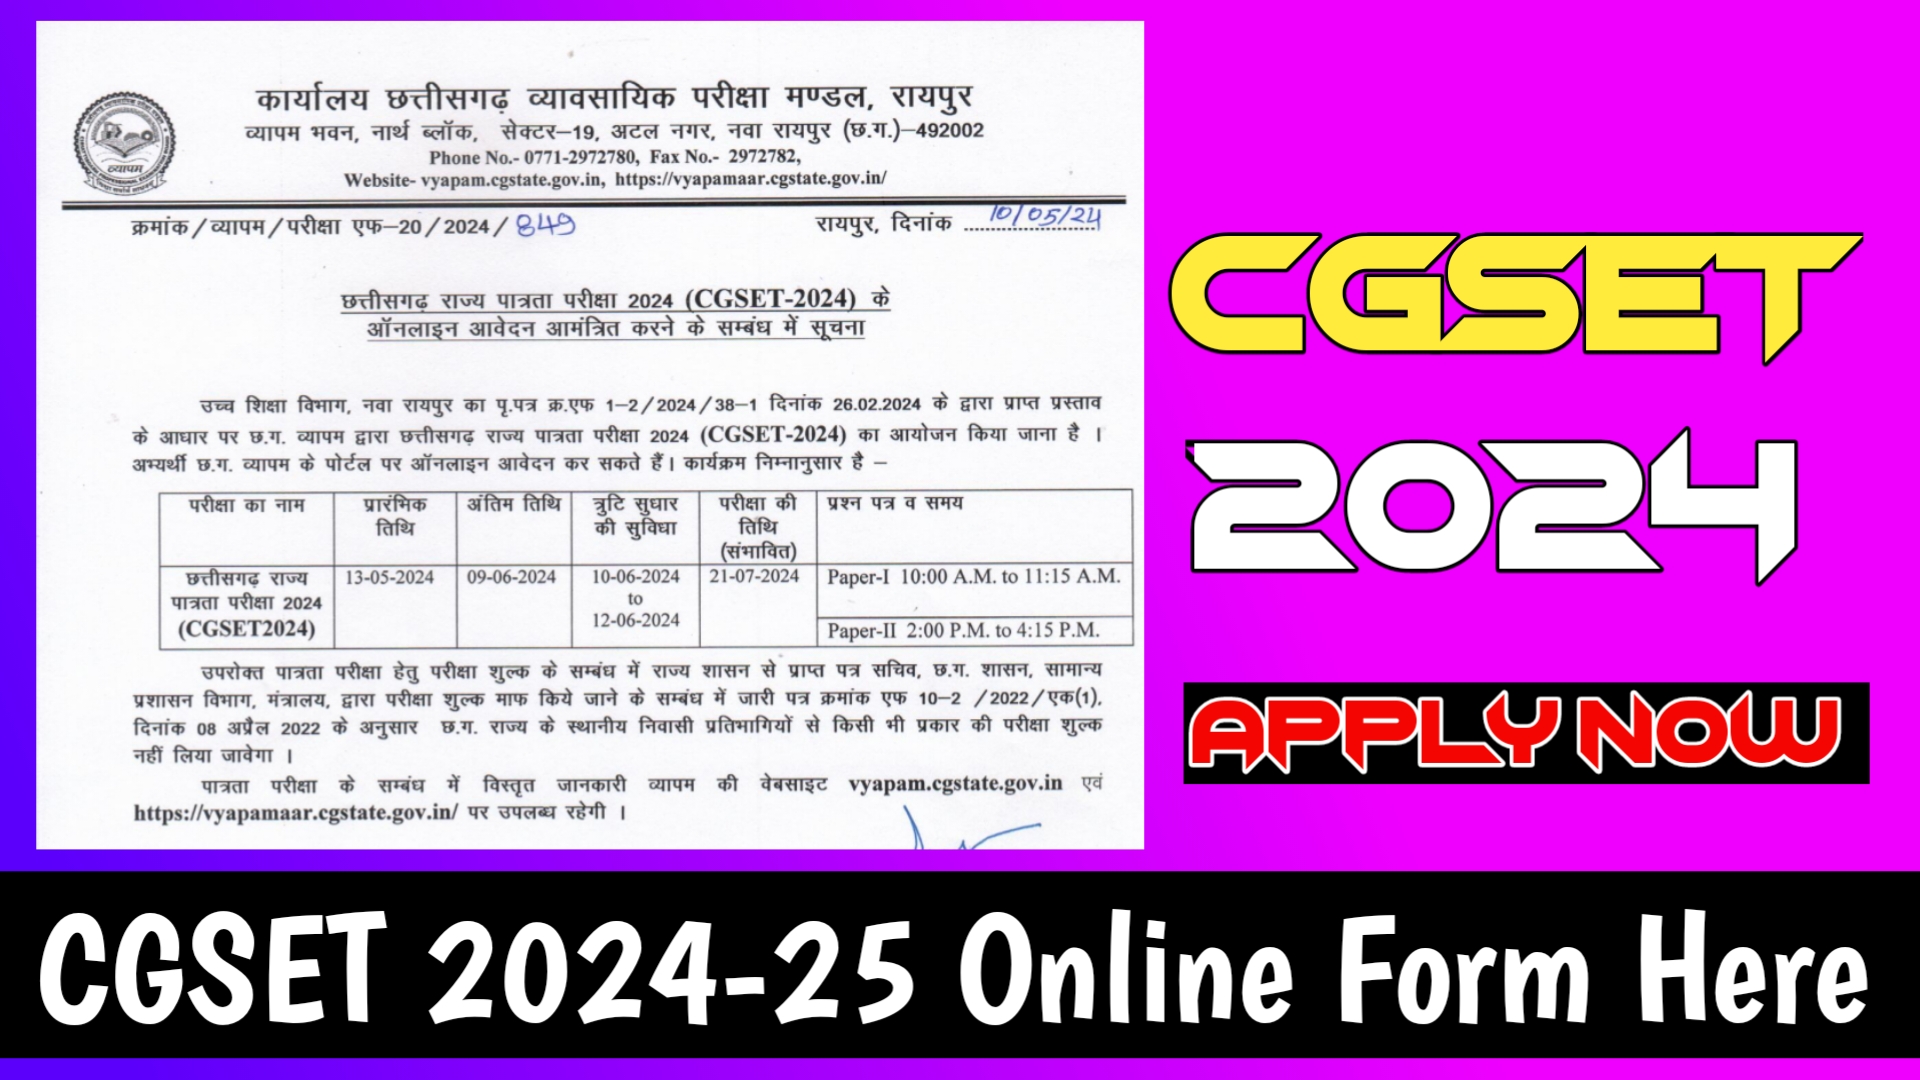 CGSET 2024-25 Online Form: Apply Now for Chhattisgarh State Eligibility Test